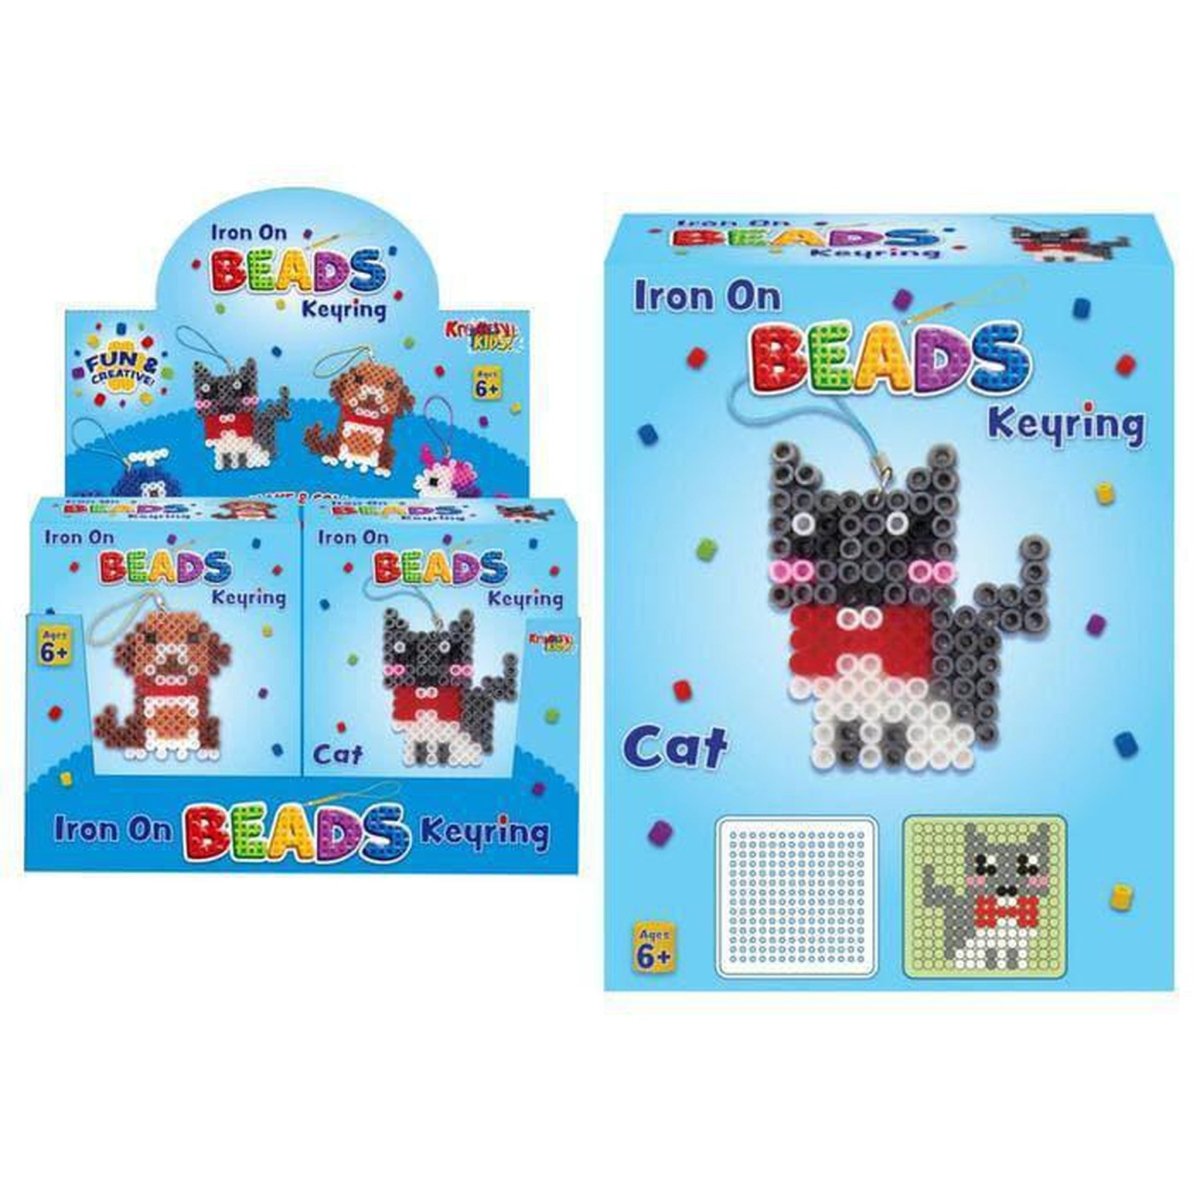 Iron On Picture Beads Keyring - Kids Party Craft